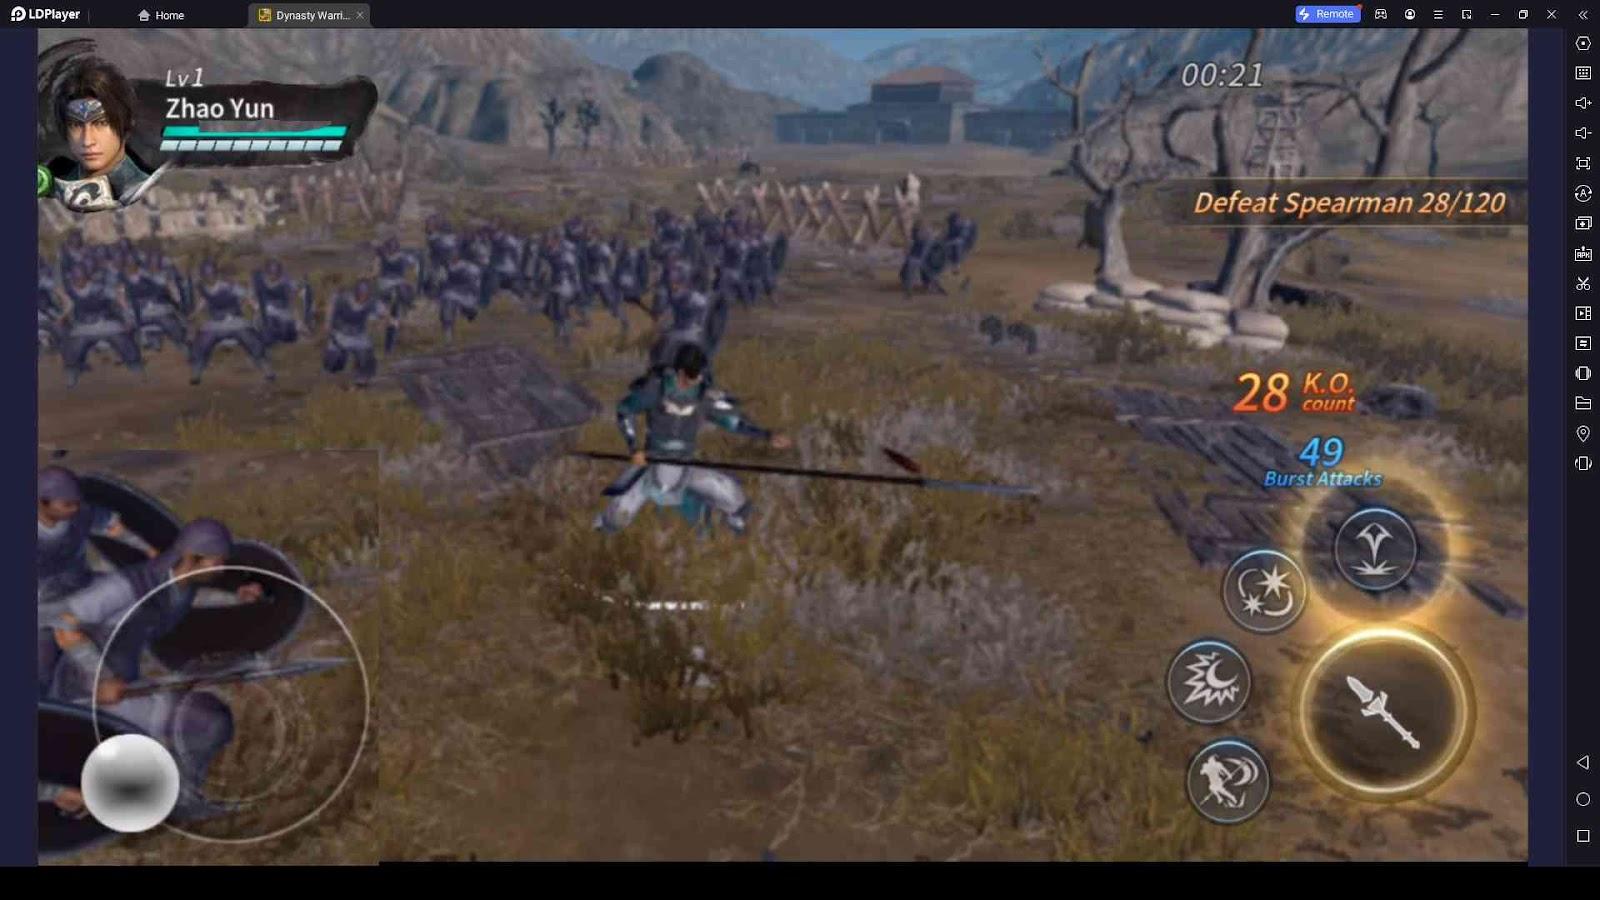 Starting with Dynasty Warriors M